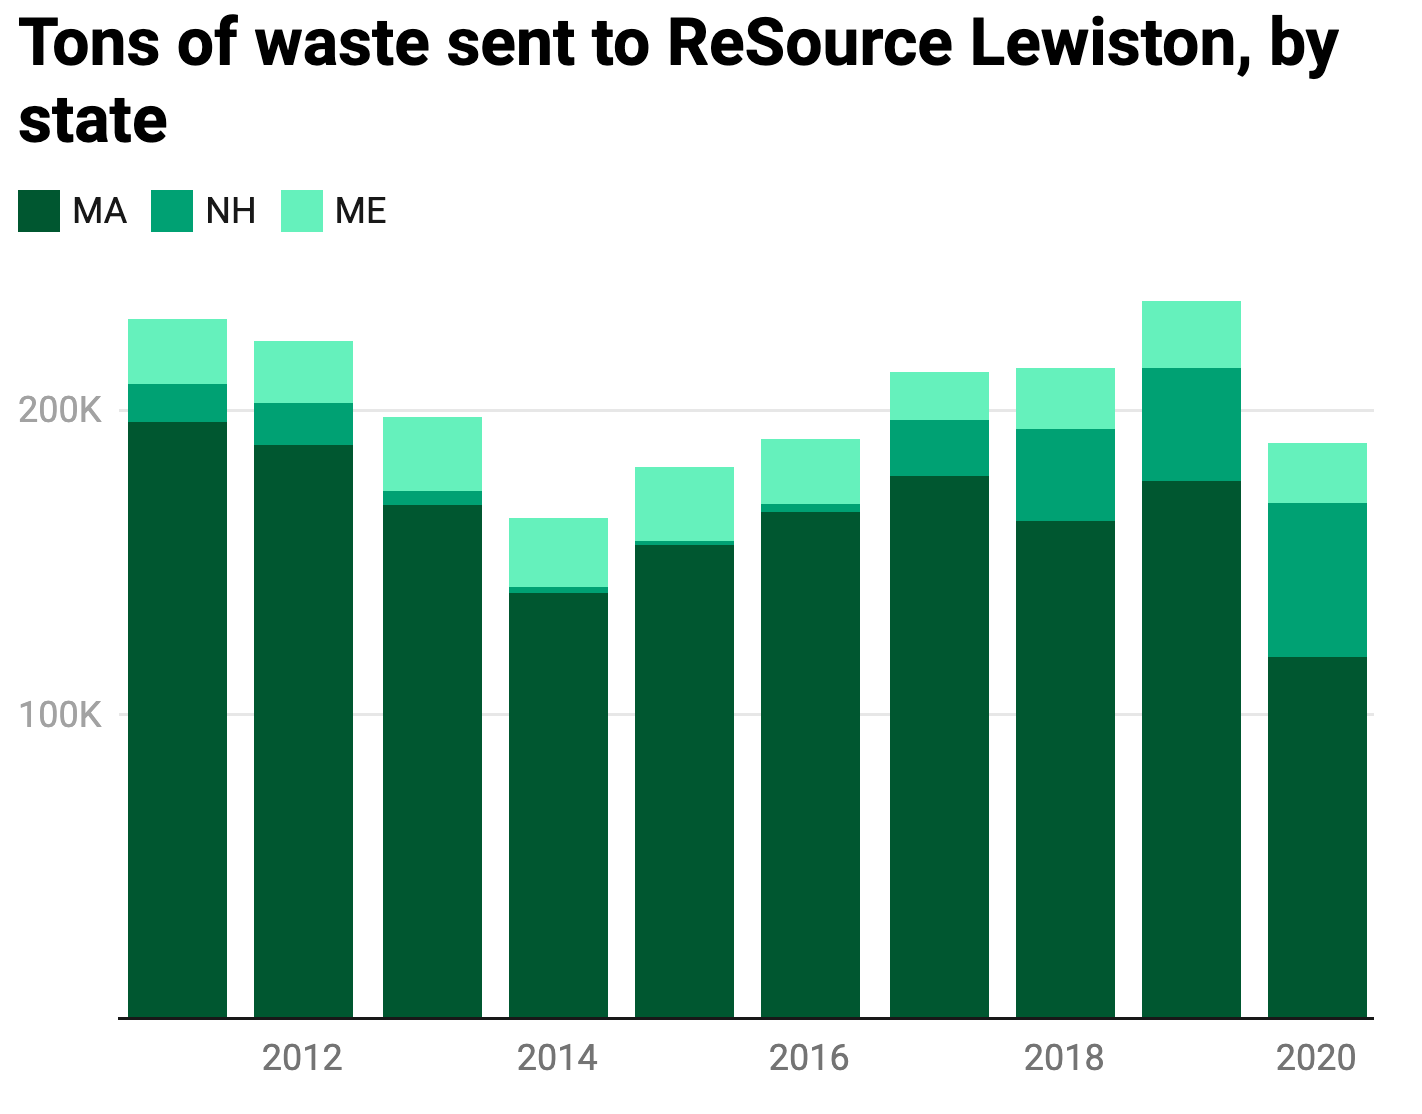 ReSource Lewiston was previously called KTI Biofuels until Casella Waste Services sold it to ReEnergy Holdings in 2013. In 2011-2013, ReSource also accepted 62 tons or fewer per year from RI and CT combined. (Chart: Maine Public, Source: ReSource Lewiston/Maine DEP, Created with Datawrapper)